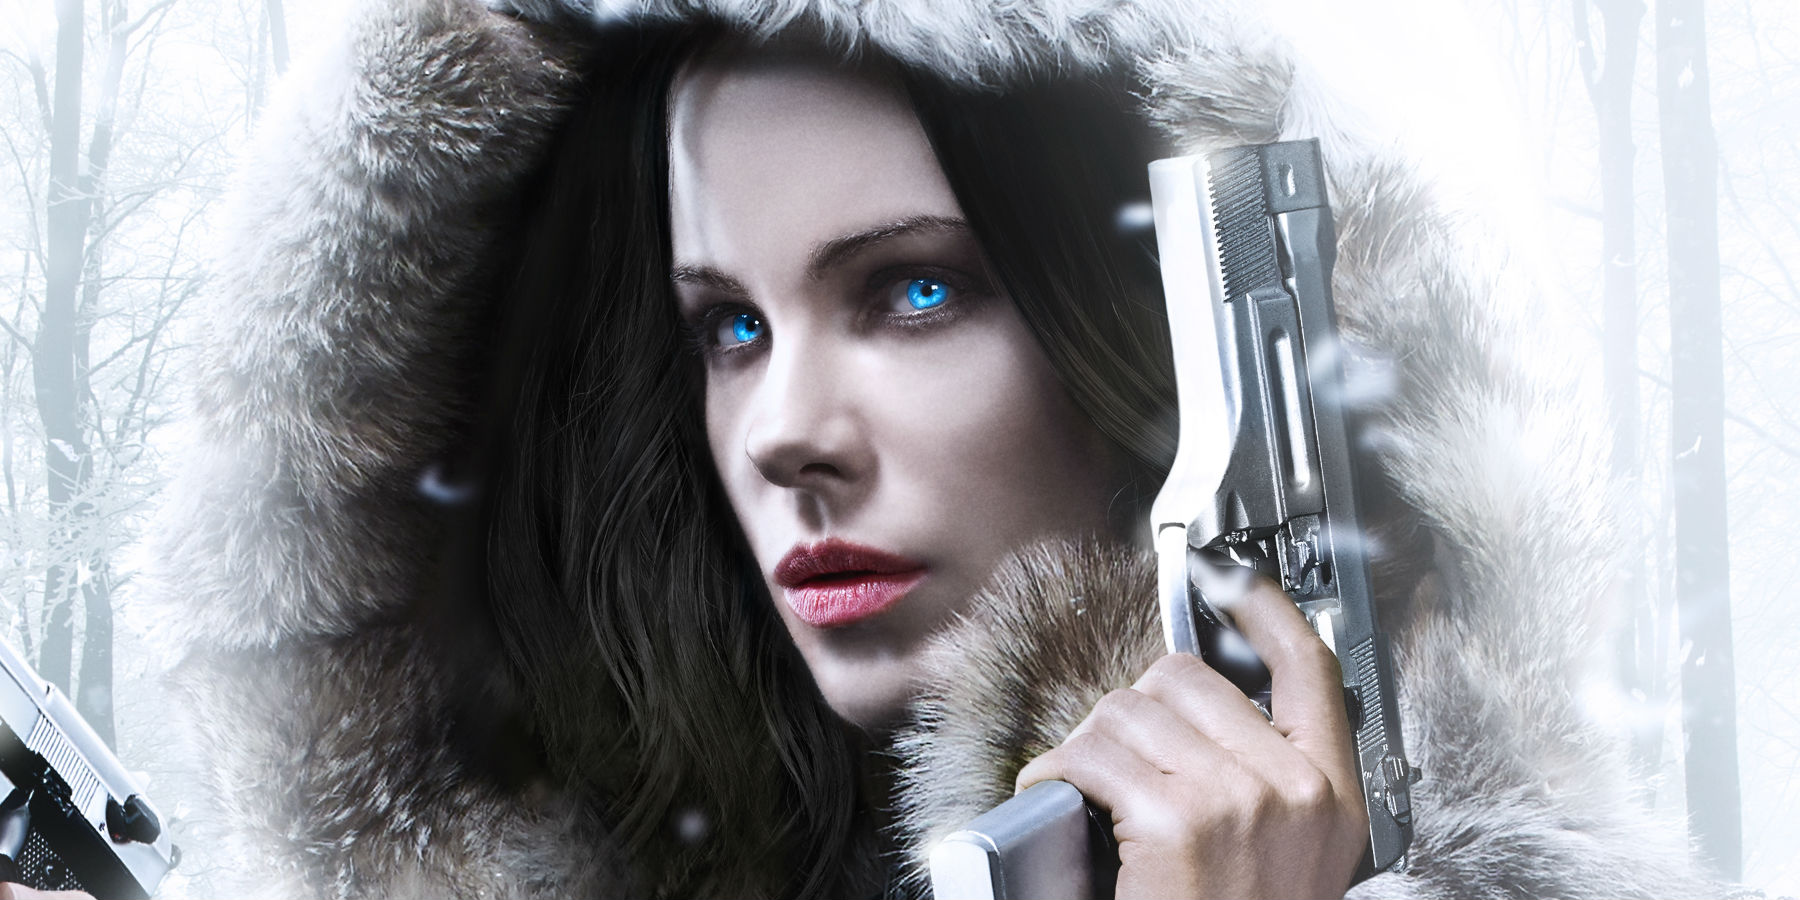 This is a still from the film Underworld: Blood Wars.